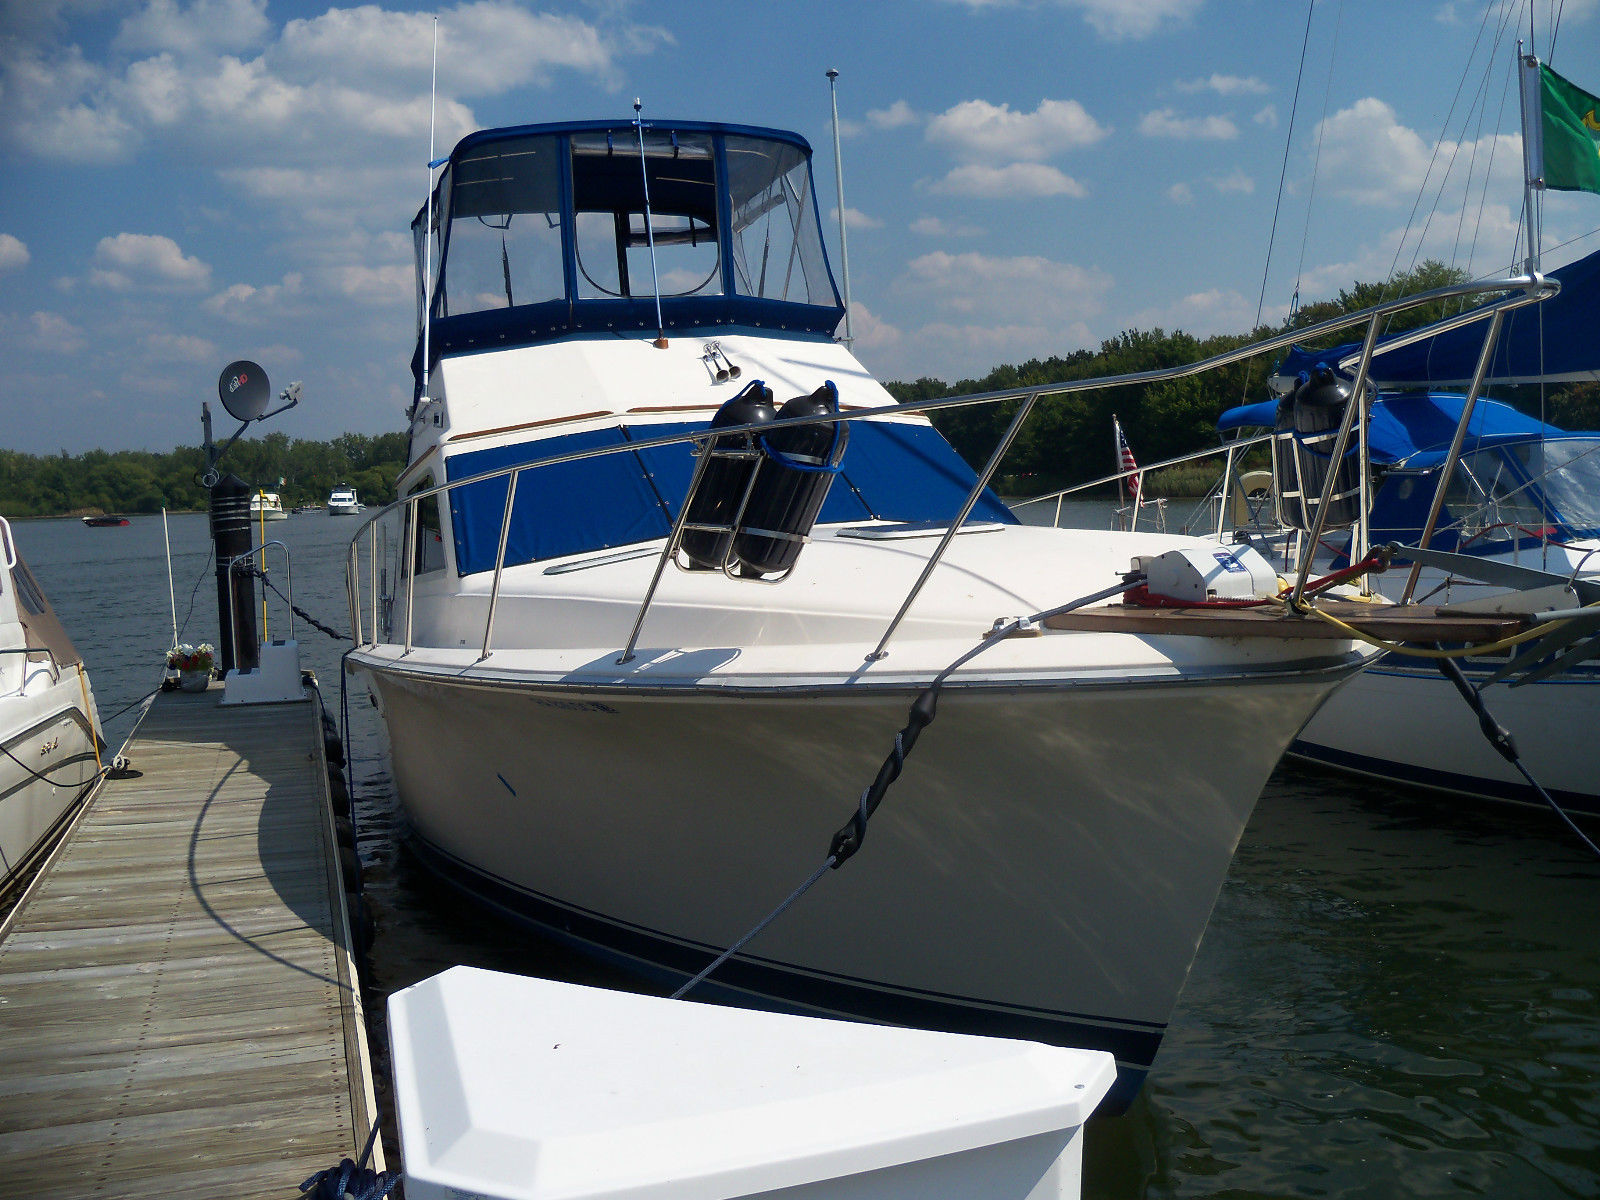 Seidelmann Pacemaker 1988 for sale for $37,500 - Boats ...